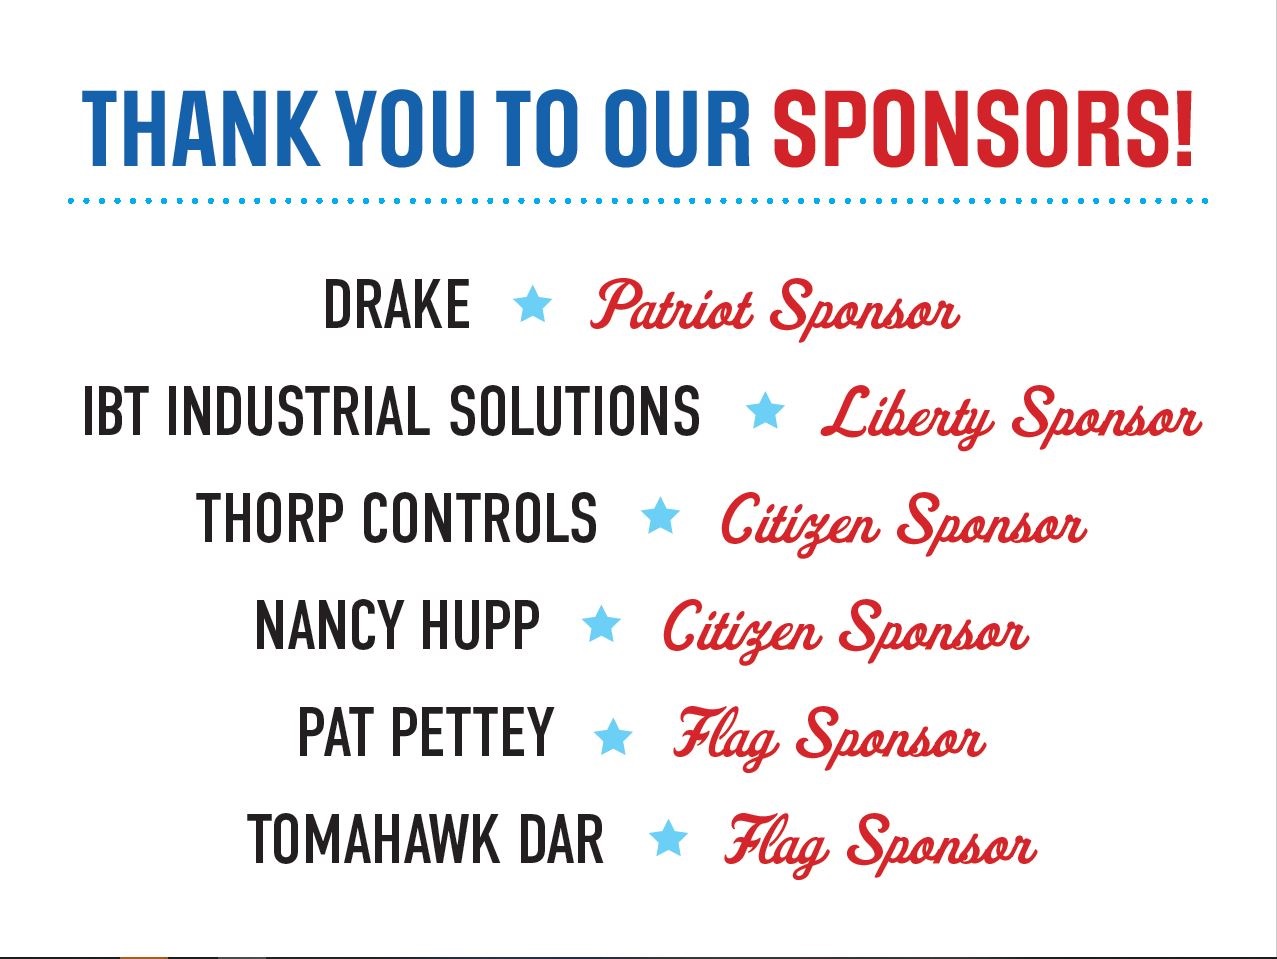 Sponsors for the annual event